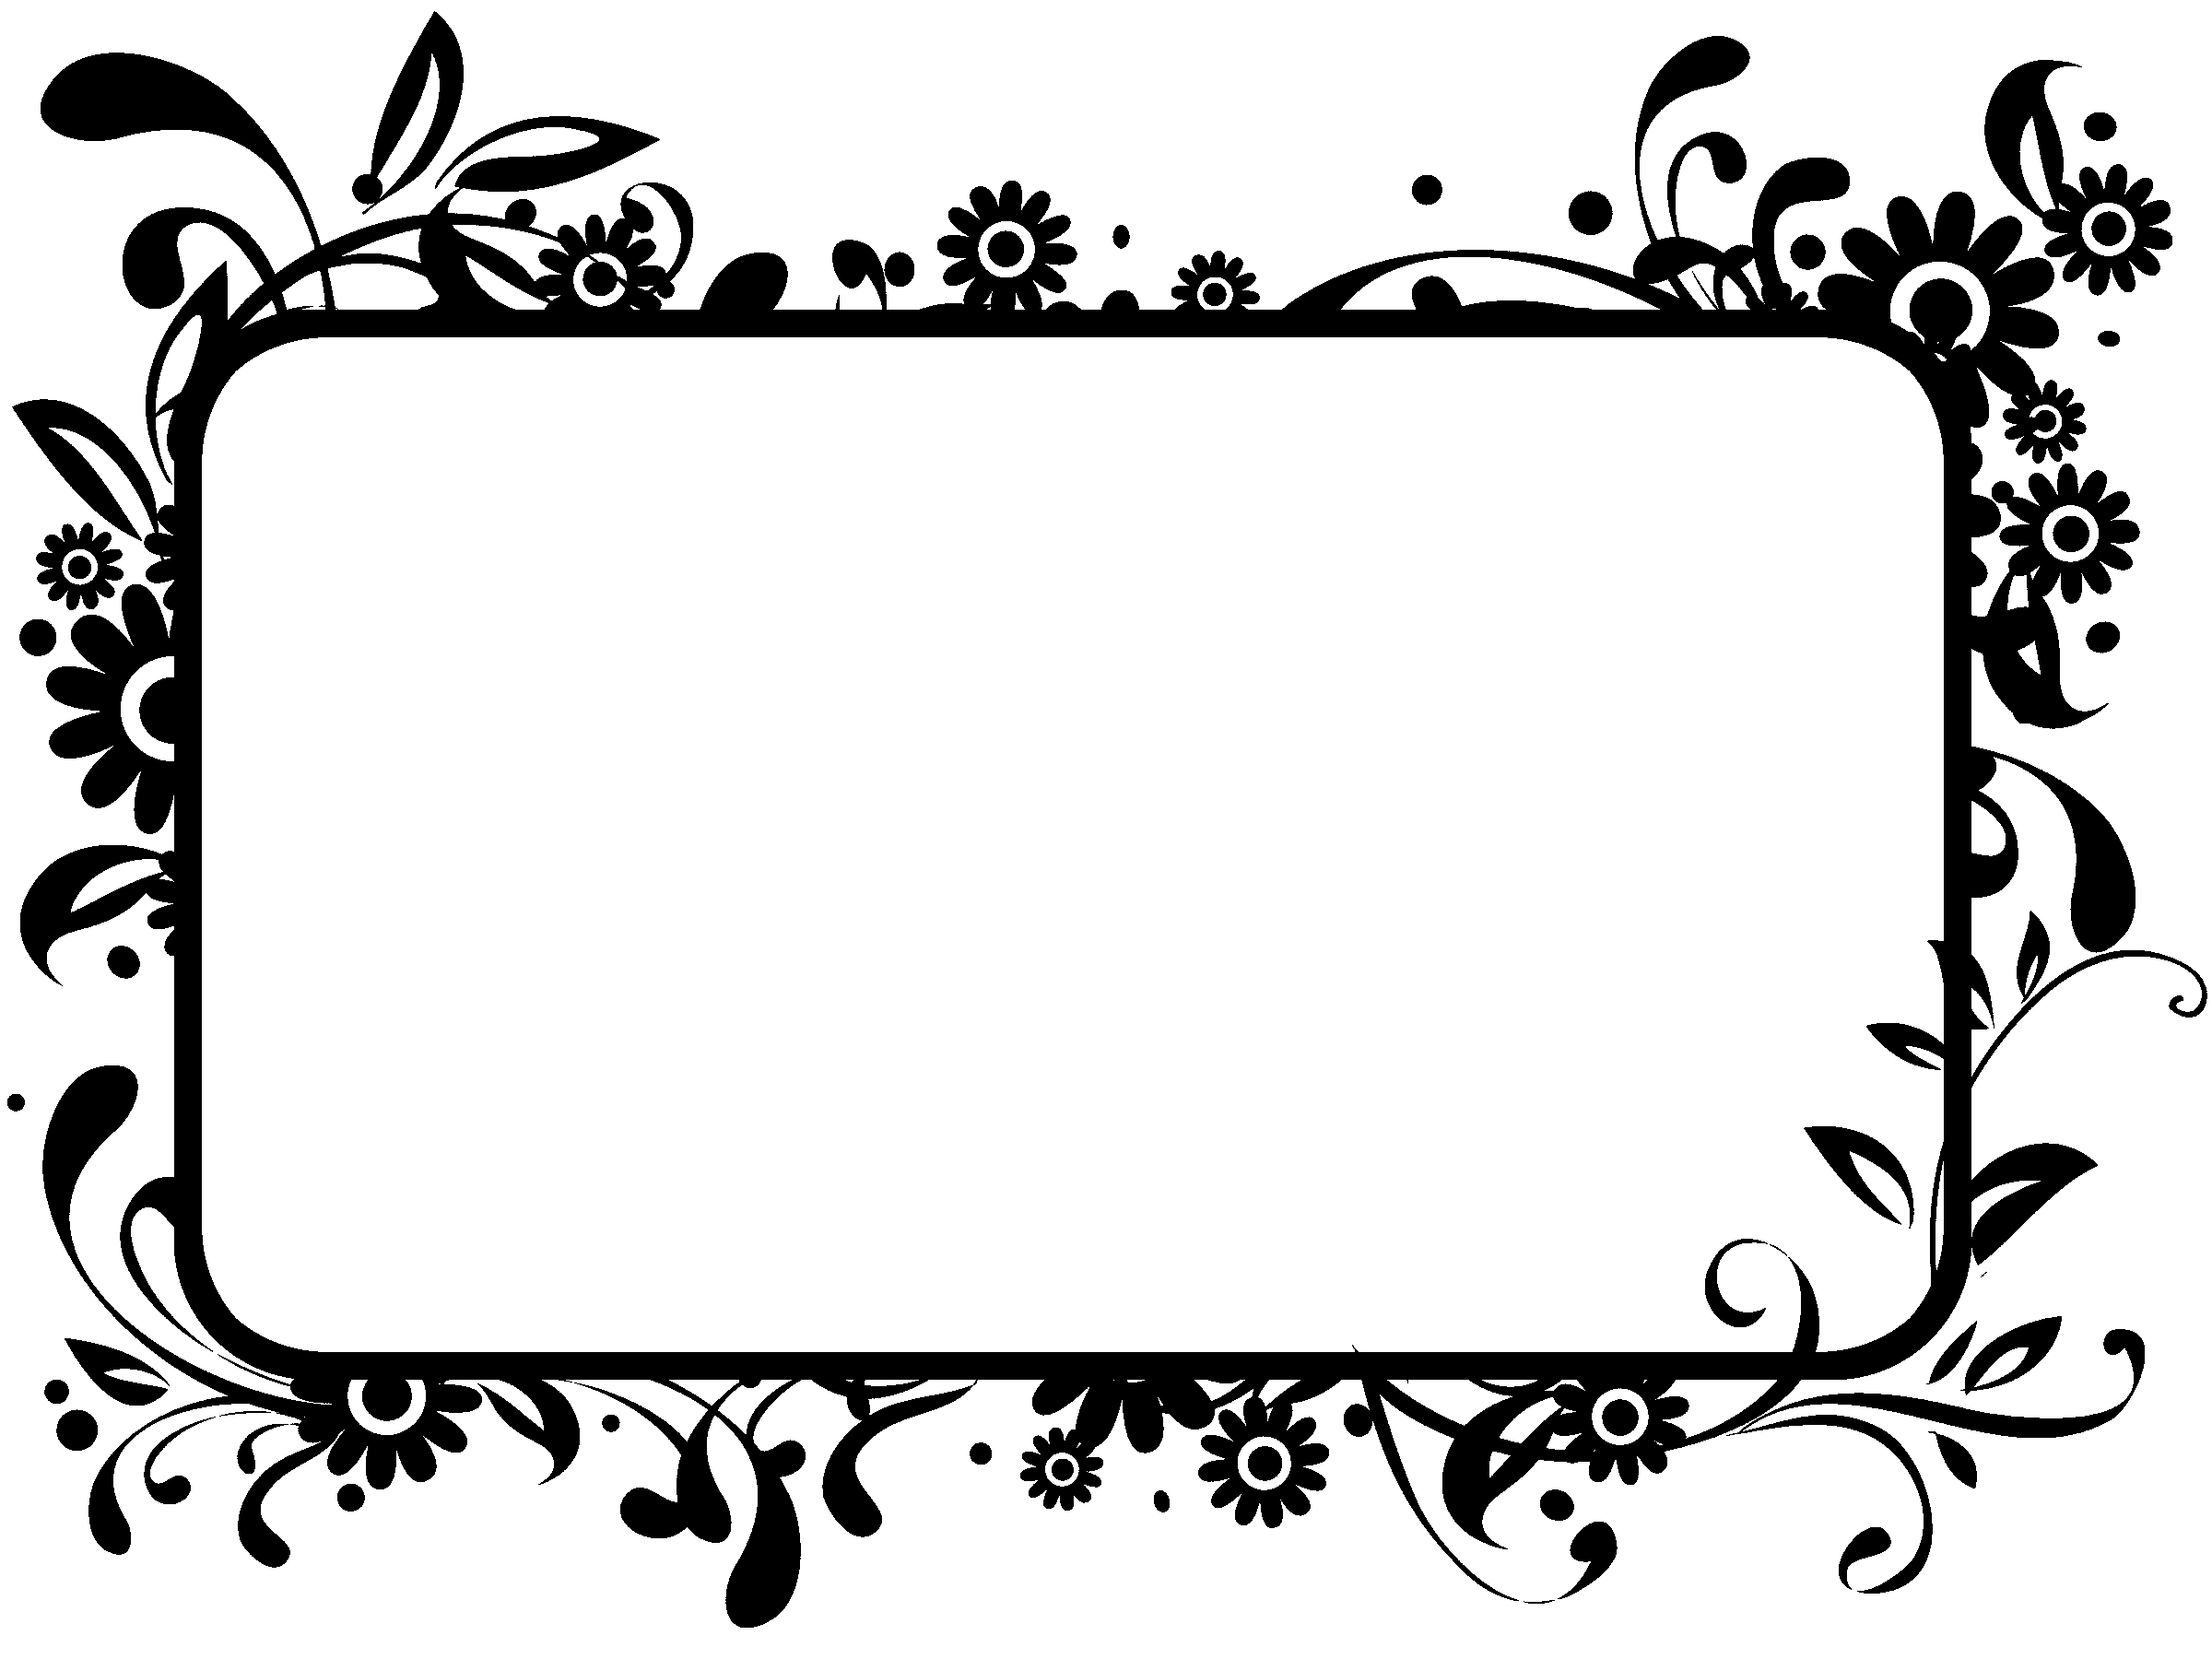 Marriage clipart border 